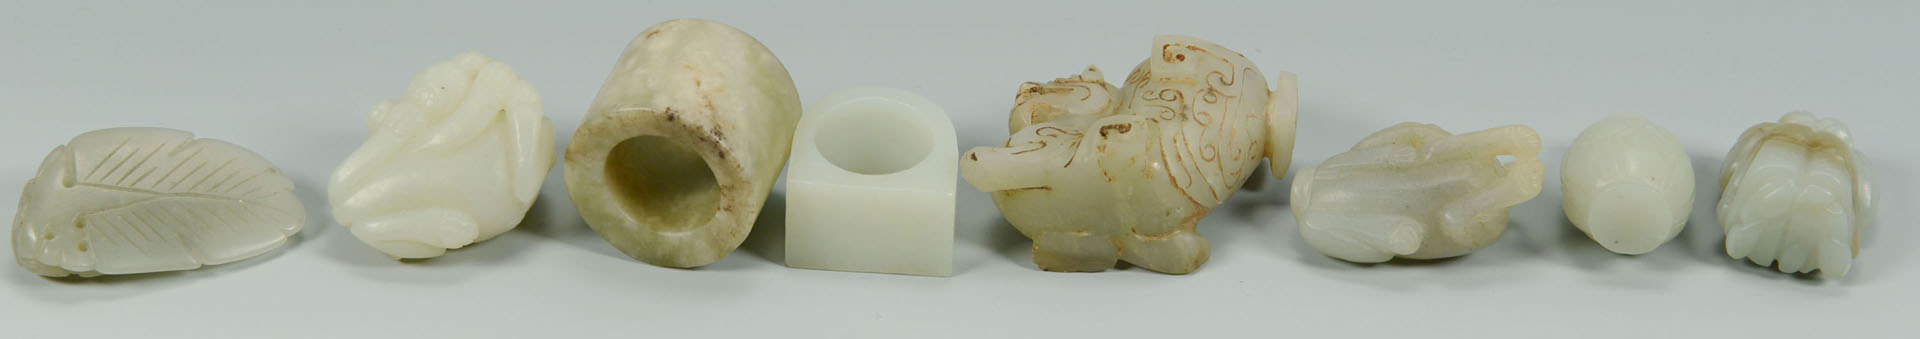 Lot 10: Grouping of 8 Carved Chinese Jade Articles